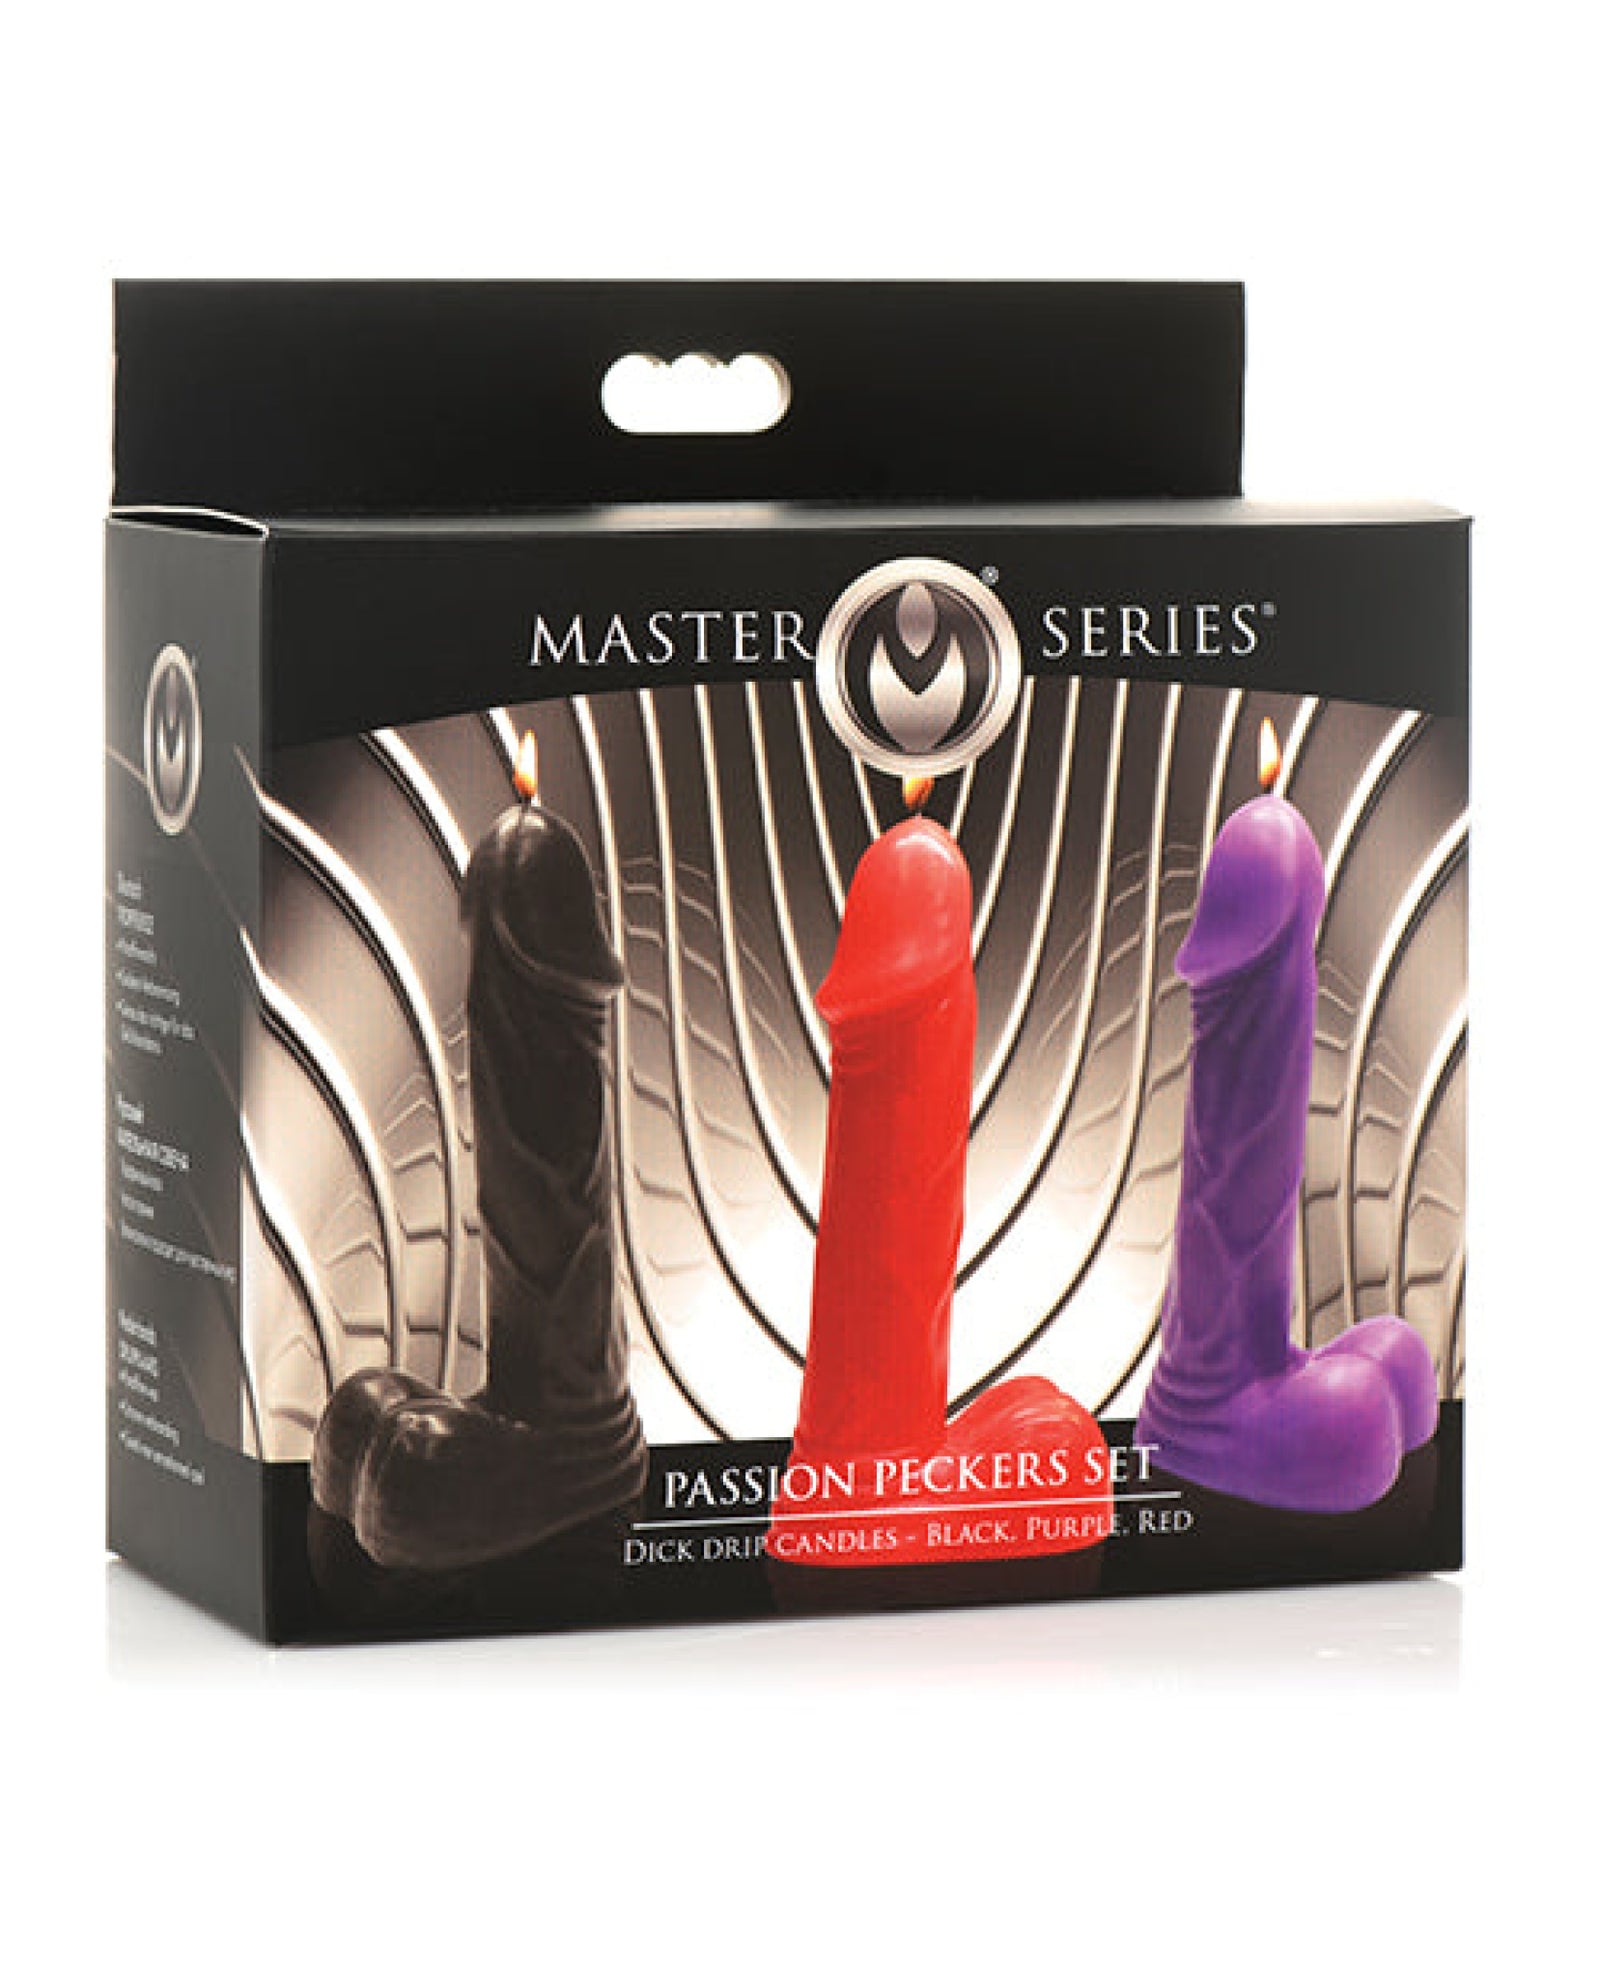 Master Series Passion Peckers Dick Drip Candle Set - Asst. Colors Master Series